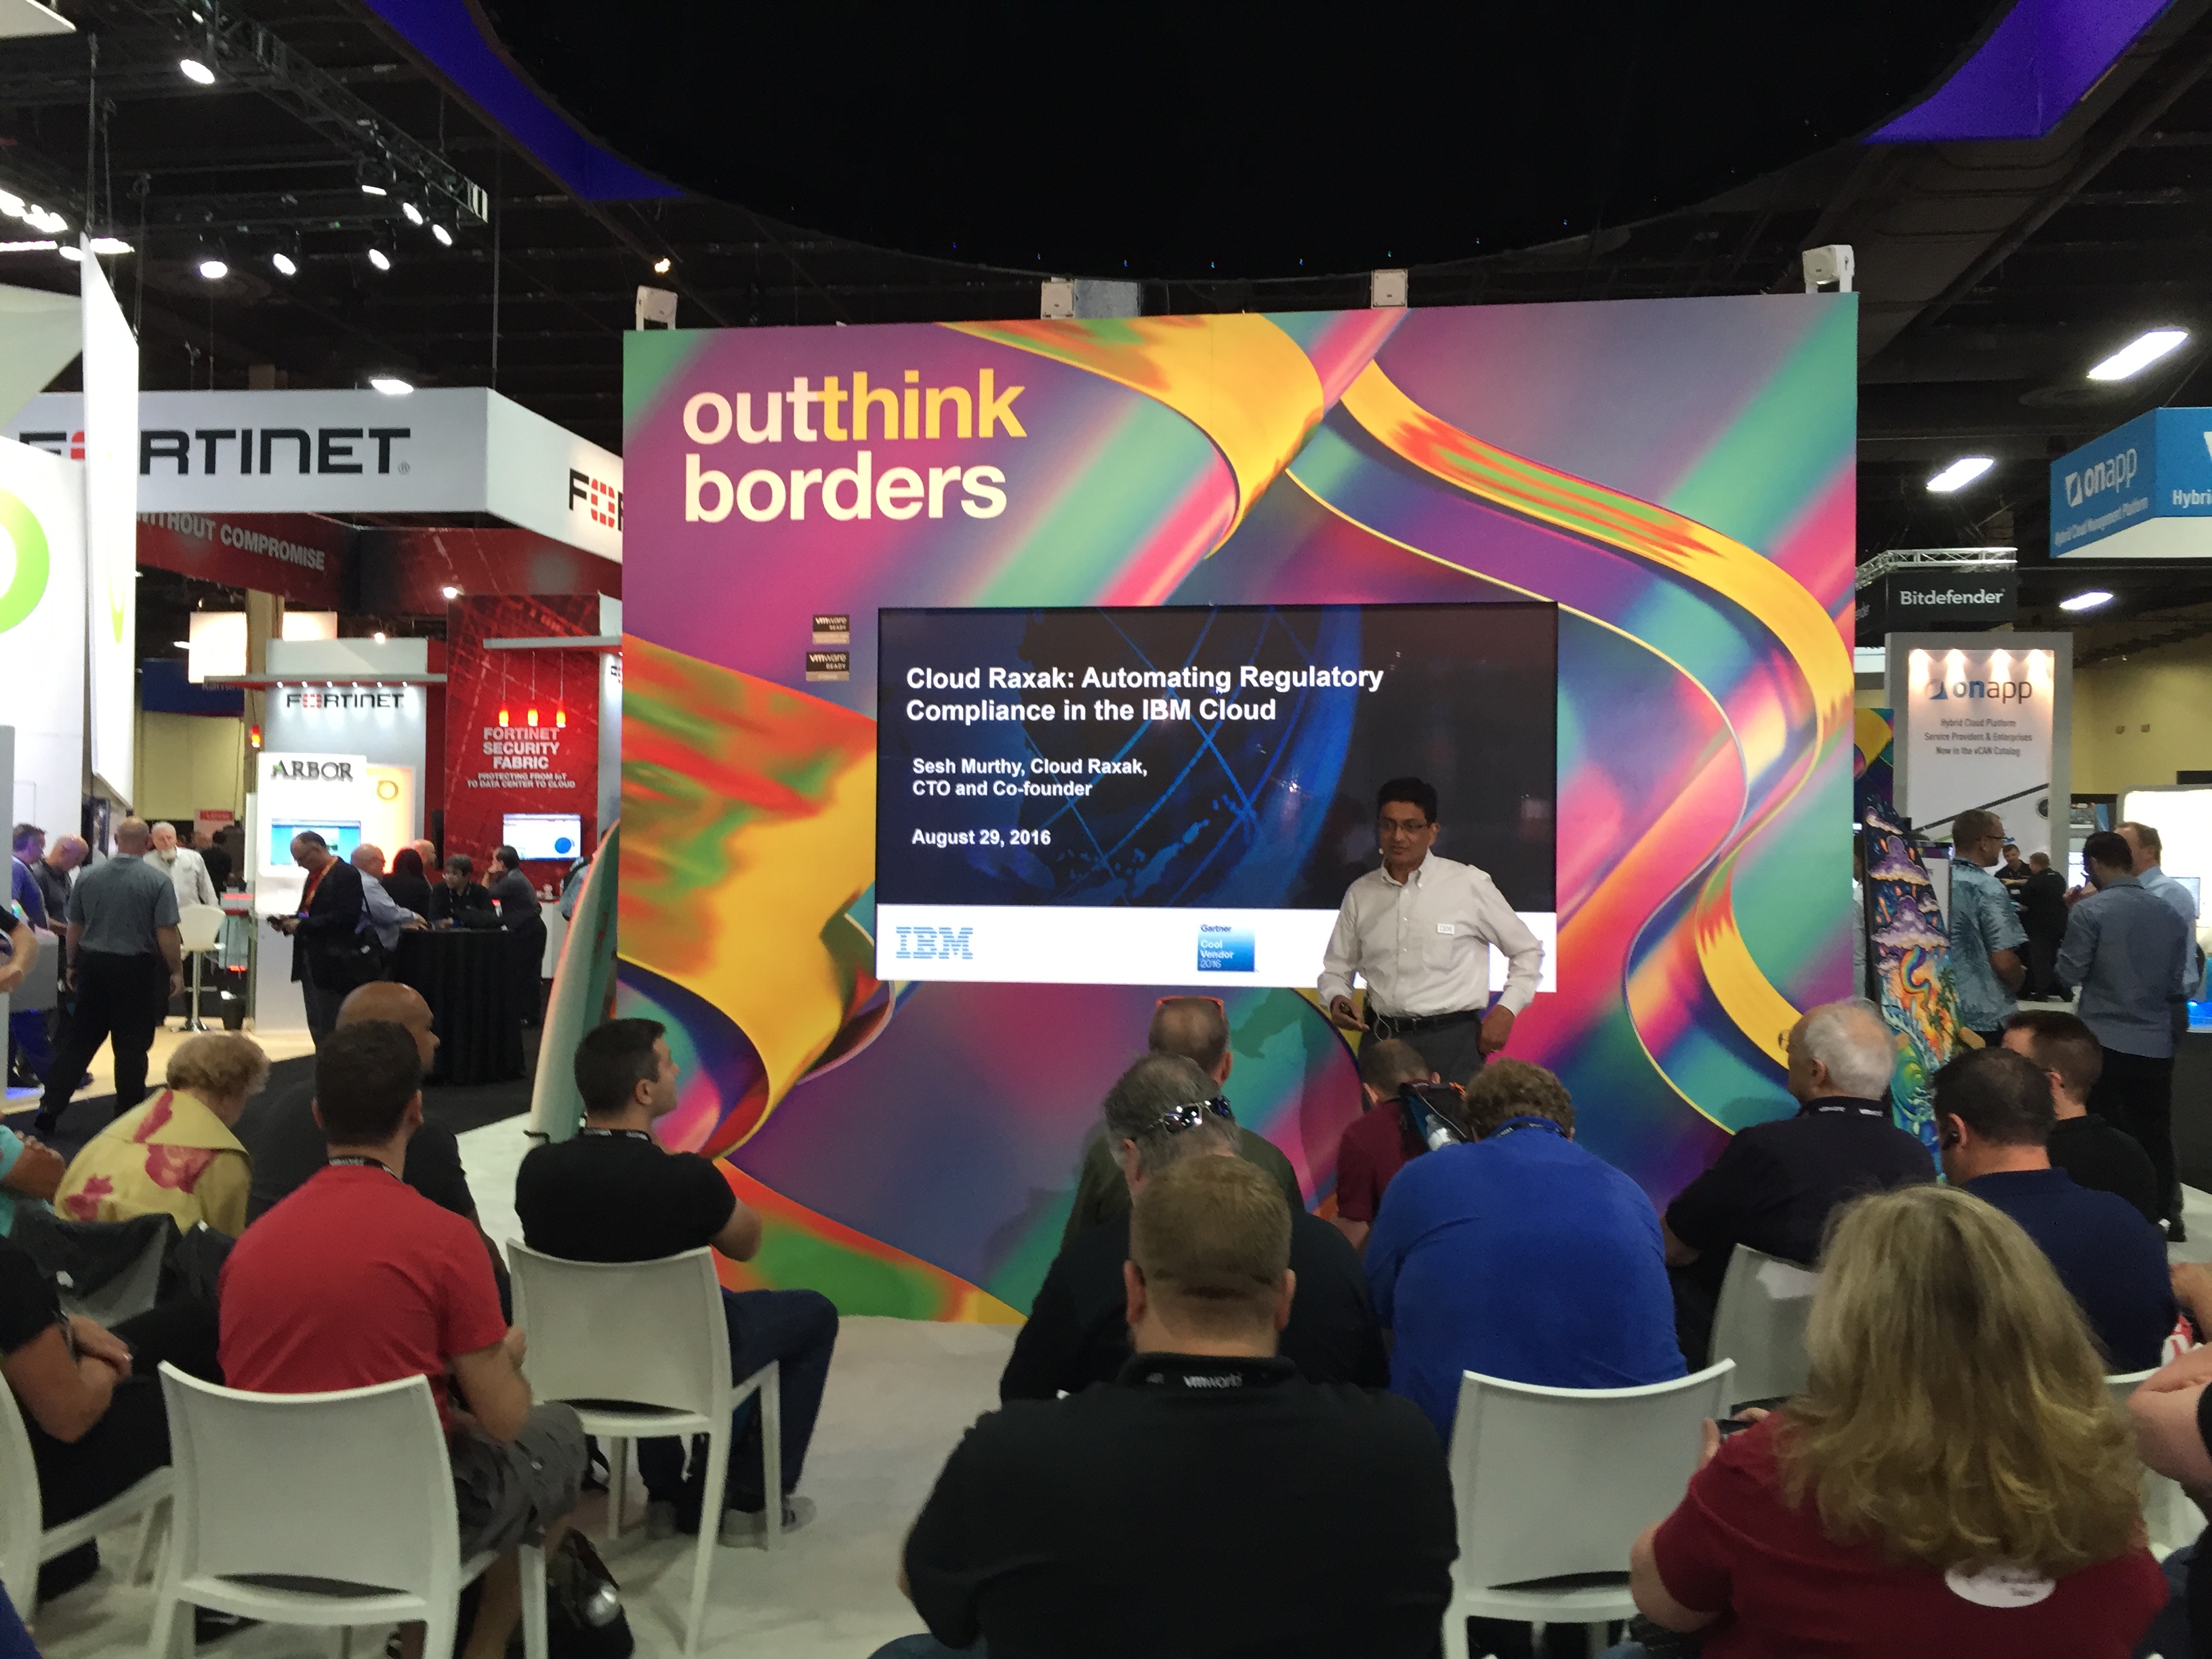 Cloud Raxak's CTO Sesh Murthy at VMworld giving a theater presentation on automating regulatory compliance in the IBM Cloud.